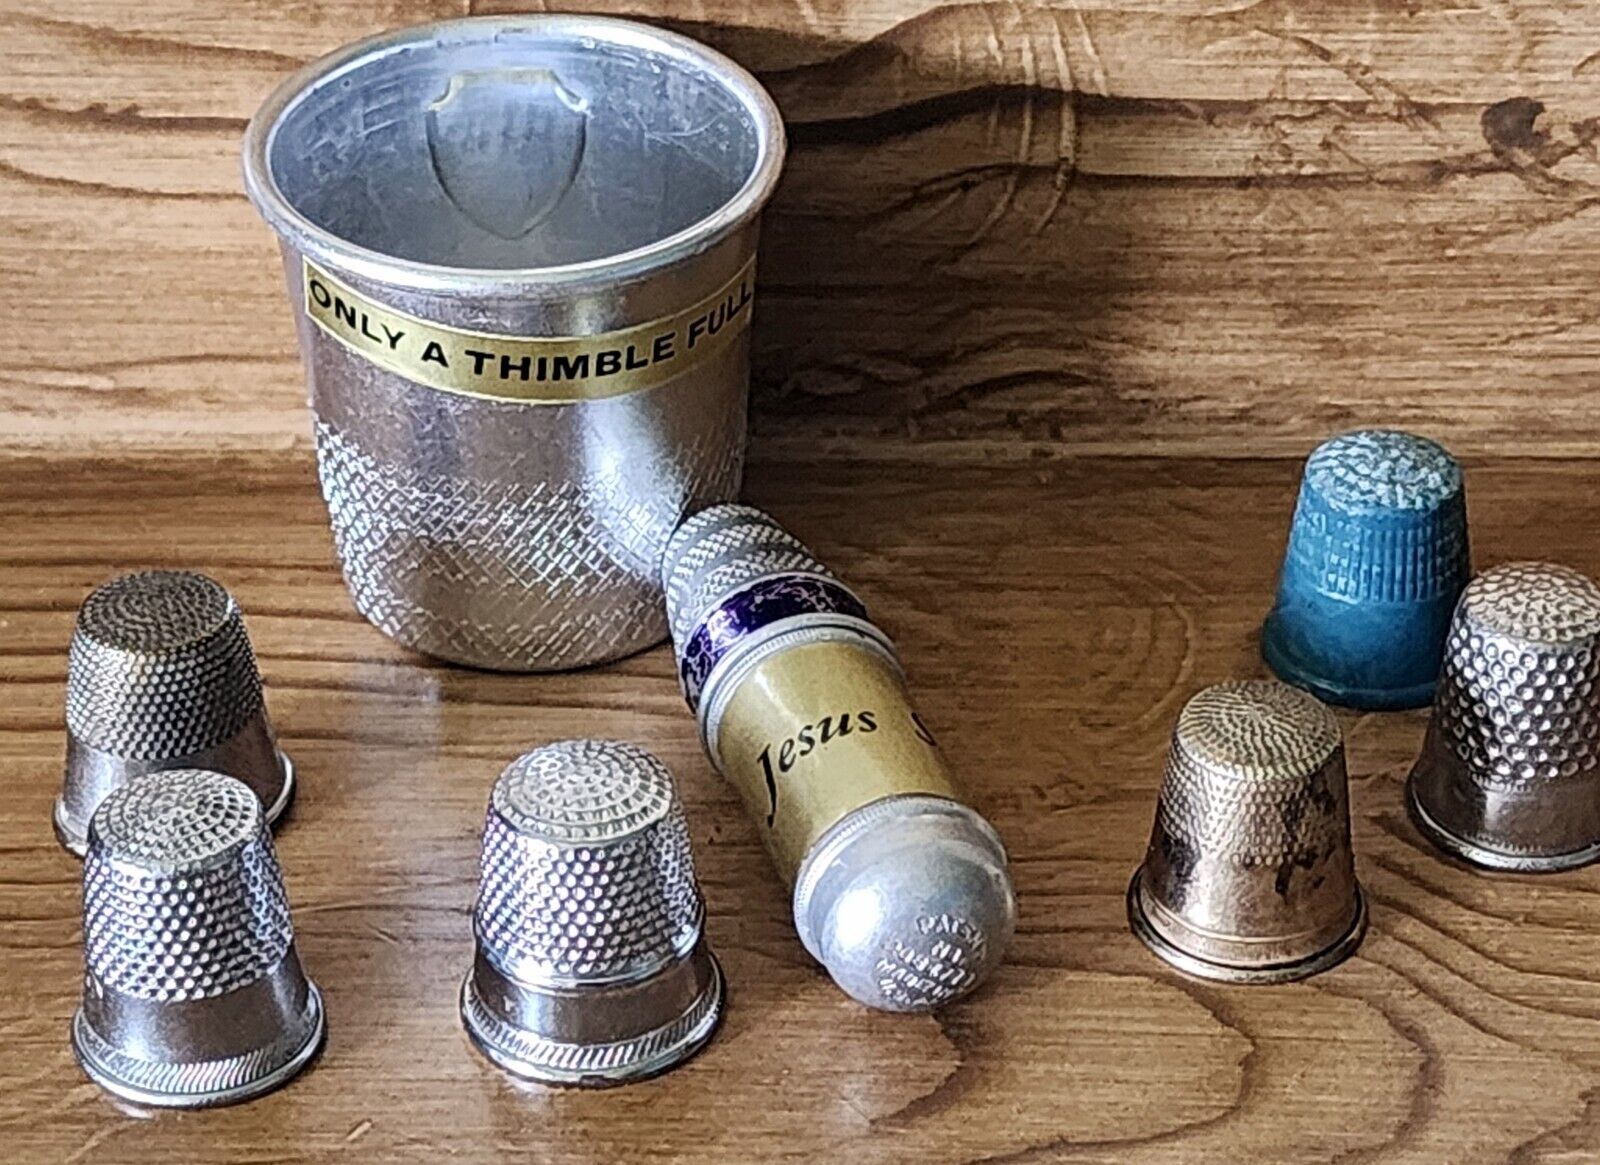 Vintage Thimble Lot Of 8 One Was Sewing Kit One Shot Glass Only A Thimble Full